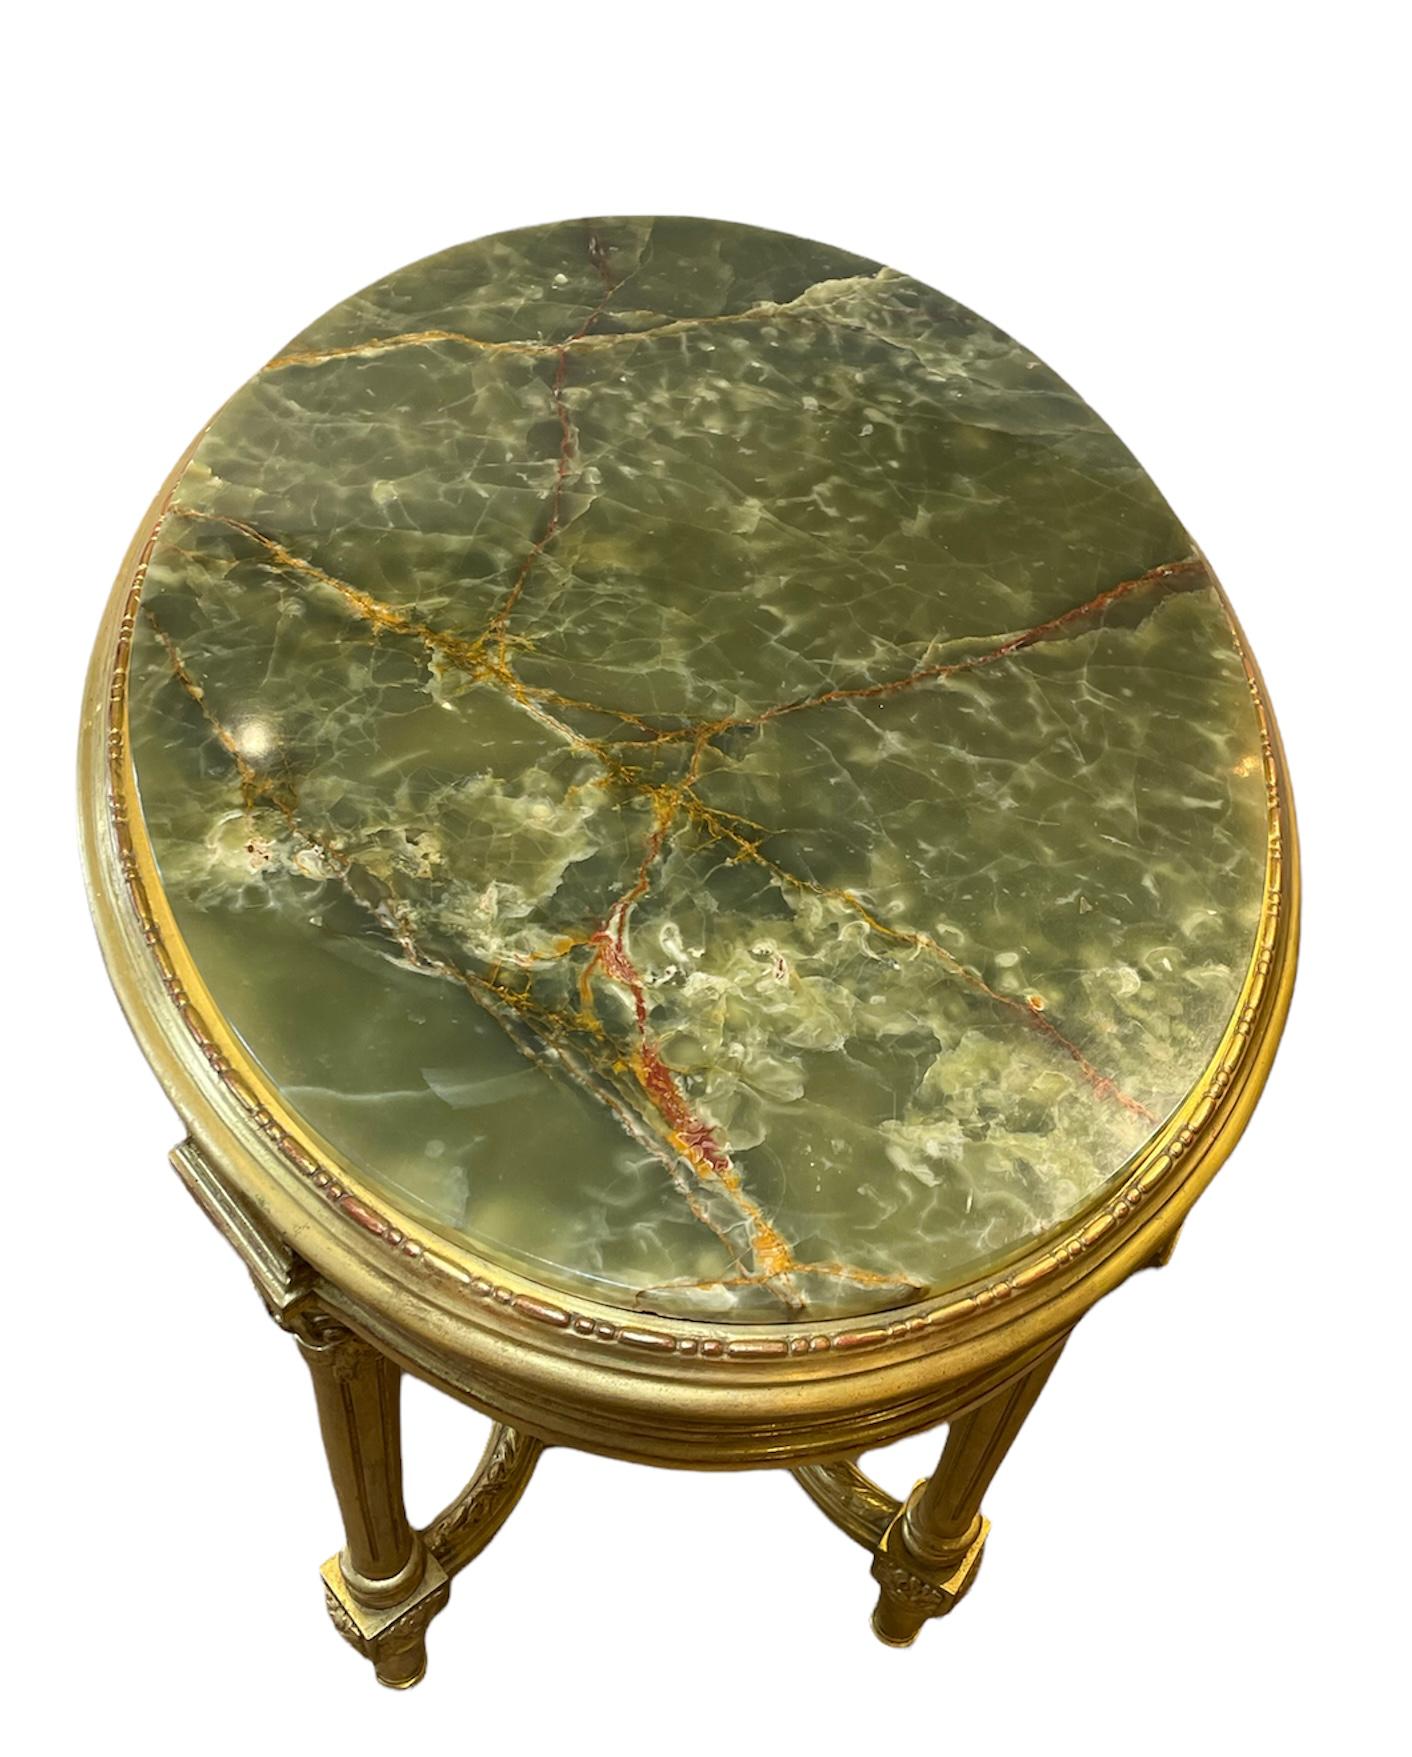 This is a Louis XVI gilt wood and green onyx oval top center table. The upper border of the table is decorated with a link of reticulated rings alternated by squares with a carved flower. Below the border there is a small apron made of scrolls of